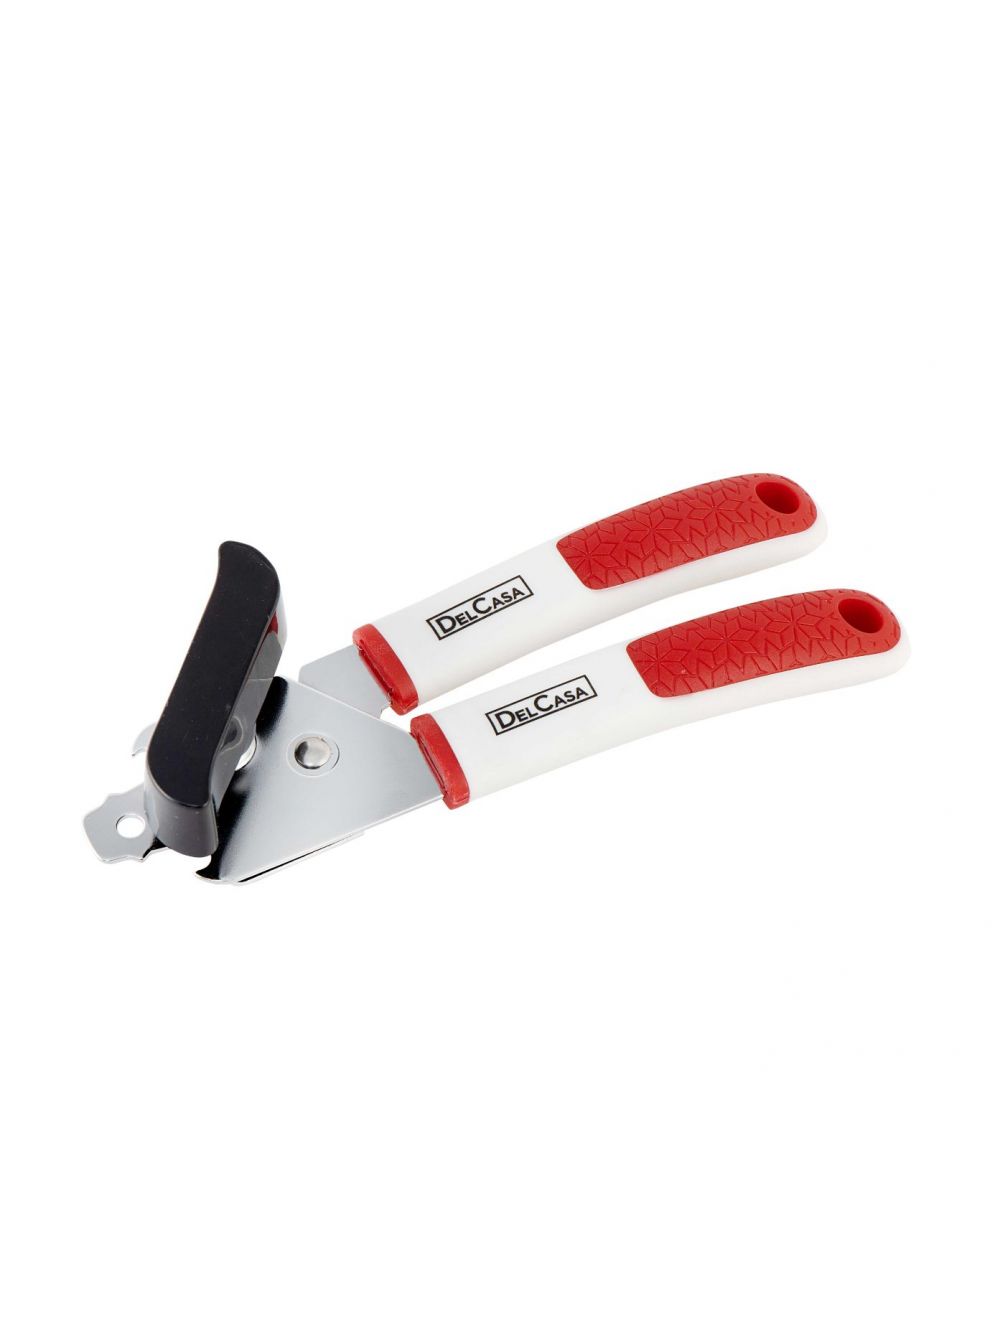 Delcasa Stainelss Steel Can Opener -DC1405